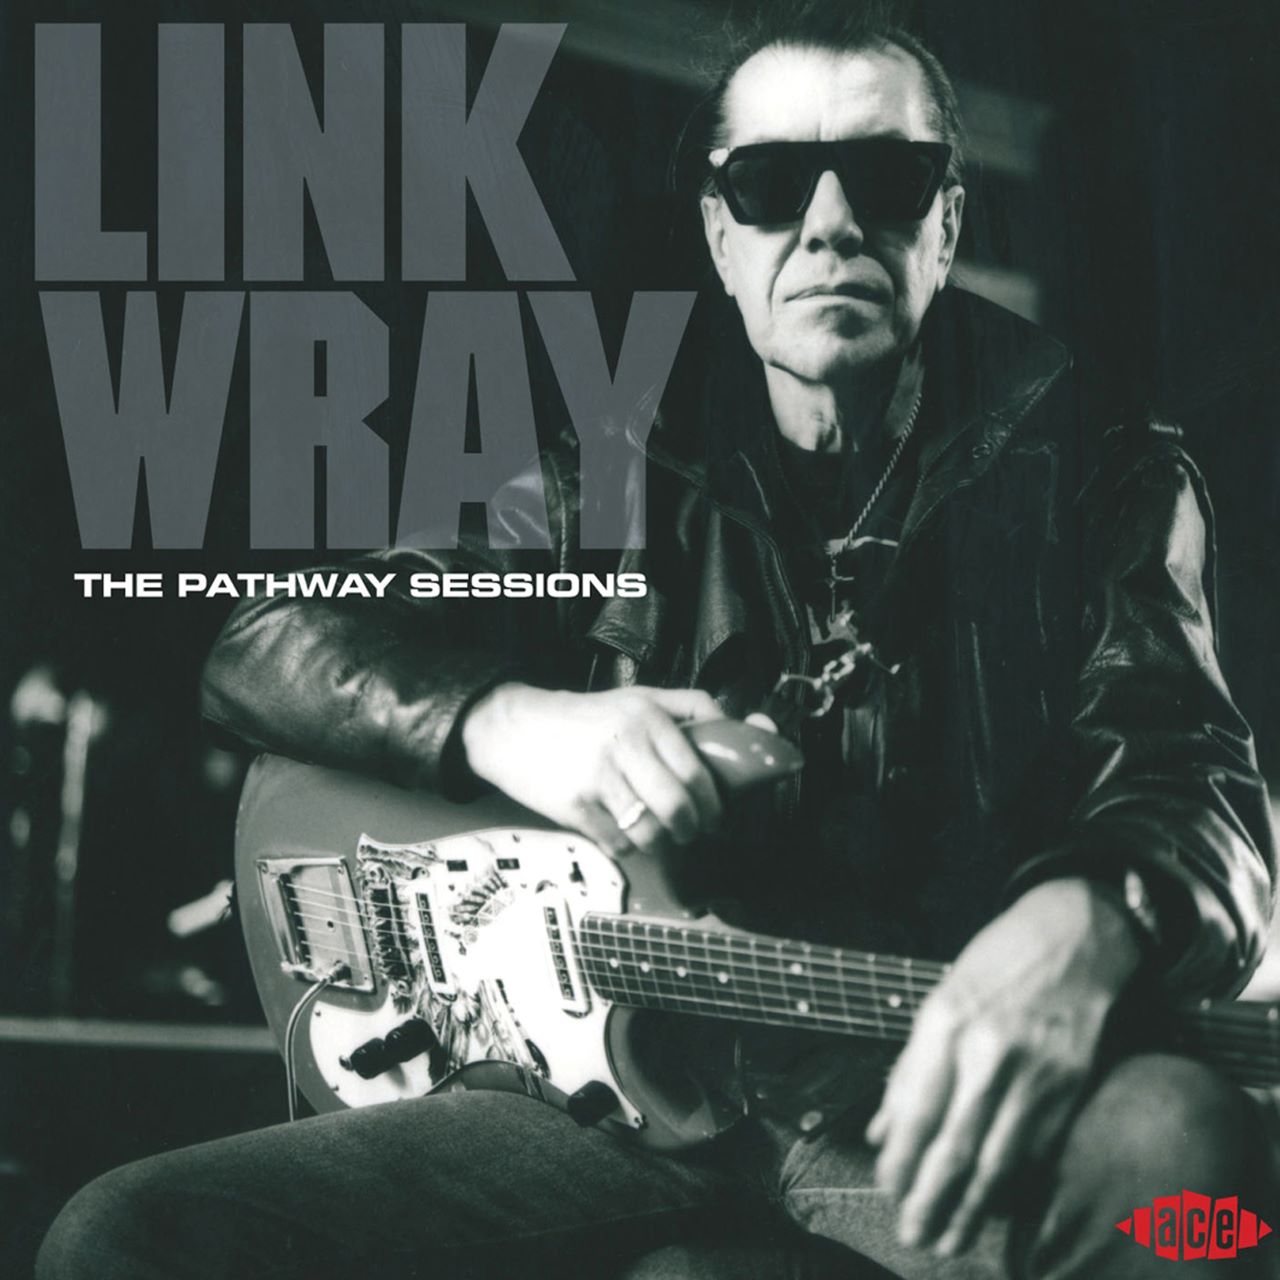 Link Wray - The Pathway Sessions cover album